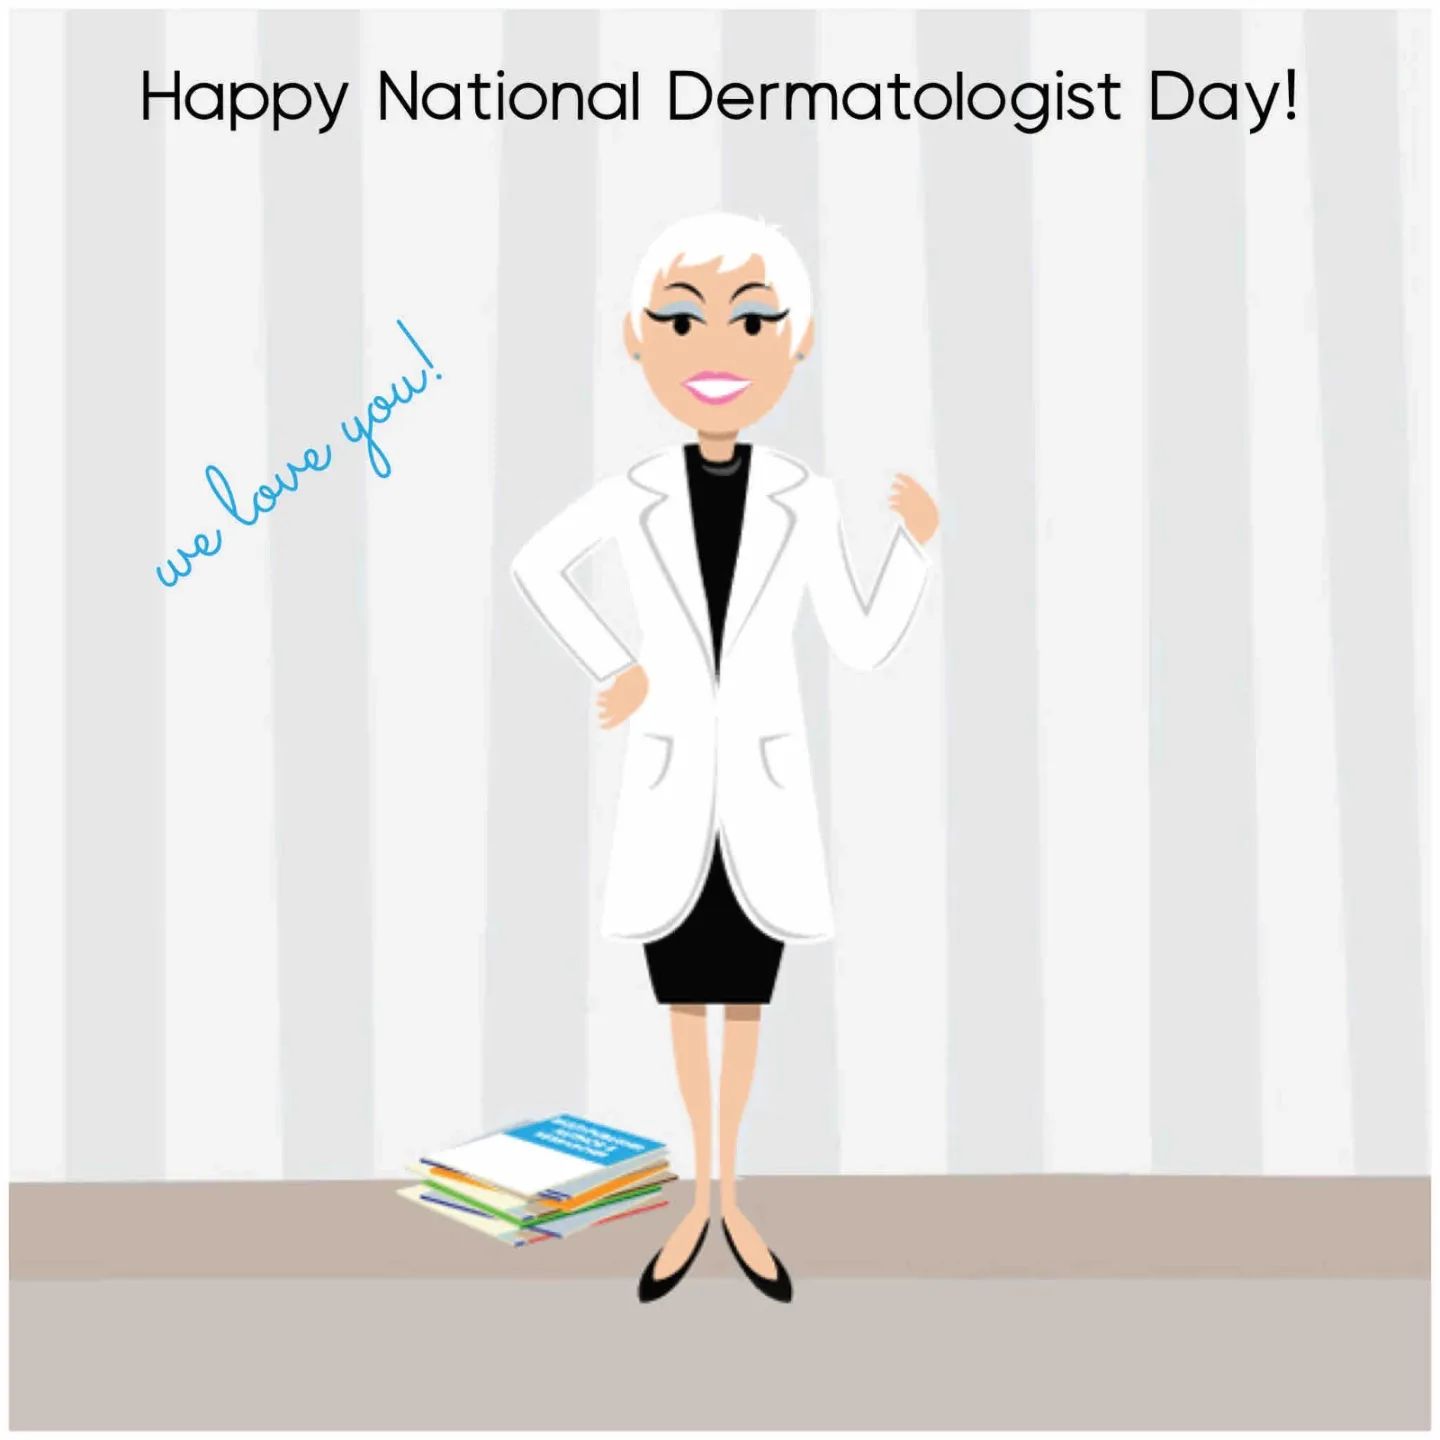 Love a VSRC derm? Let them know! March 13 was National Dermatologist Day! 🧑‍⚕️

We’re late but could NOT miss the opportunity to celebrate Board-Certified Dermatologists and thank them for all the amaaaaaaaaazing study, detective work, and care that they do for our body’s largest organ, our skin! 🎉

We were founded by a dermatologist-dermatopathologist who still teaches and trains residents with her brilliant community of dermatologists. And one of our founder’s daughter’s is currently a dermatology resident! 👩‍👧

So when we say we appreciate the derms, WE APPRECIATE the derms! 😁💕

Want a dermatologist BFF? Contact us at 09176230528 or https://seriousmd.com/provider/vmv